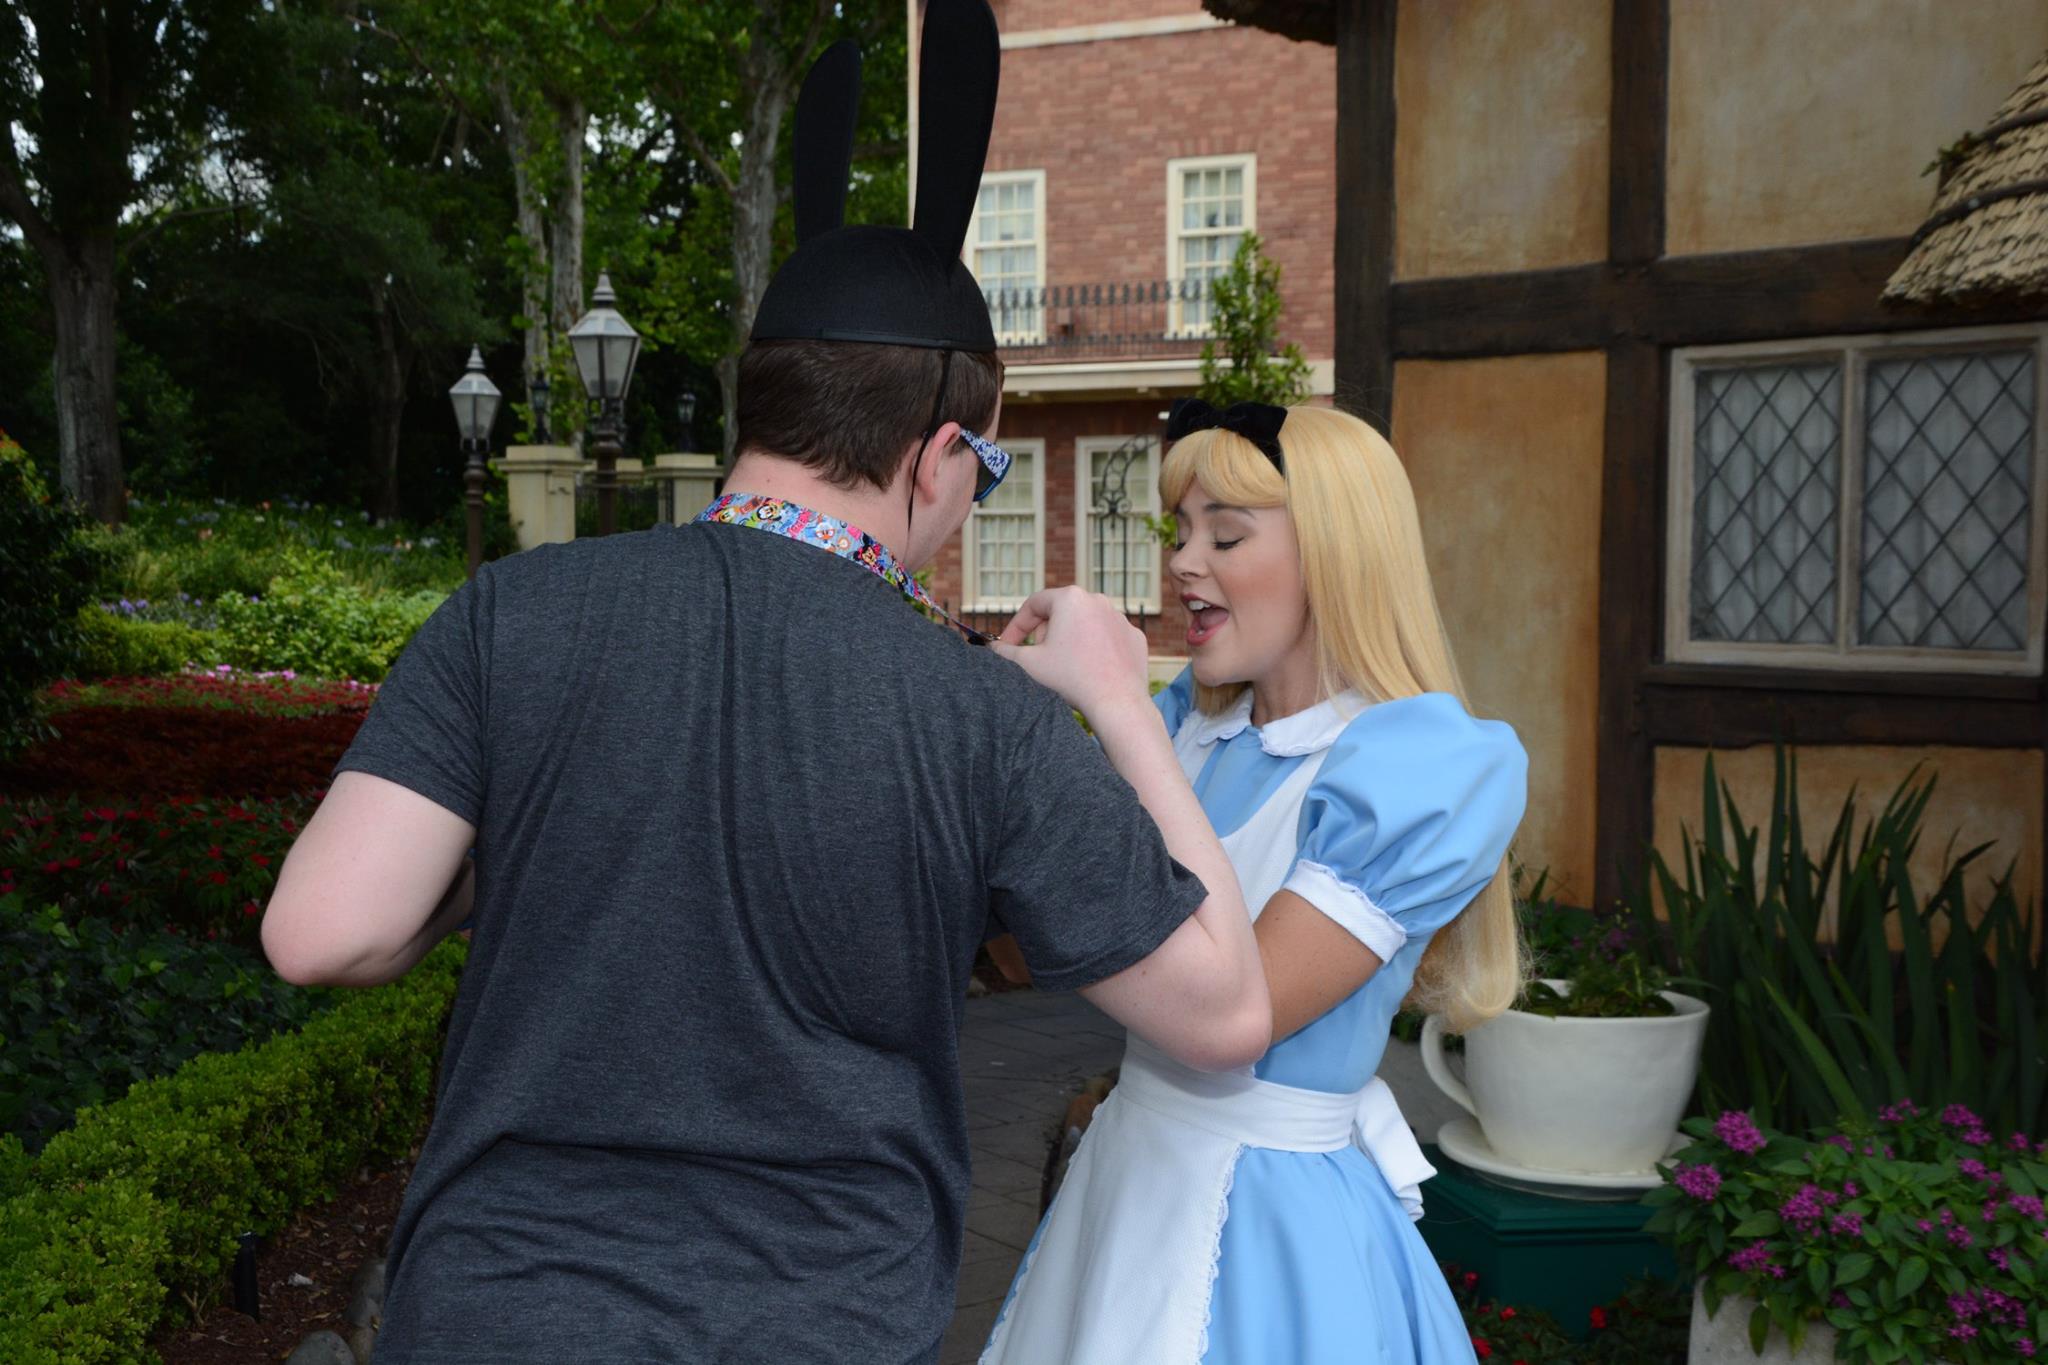 Showing Alice my Cheshire Cat Pin